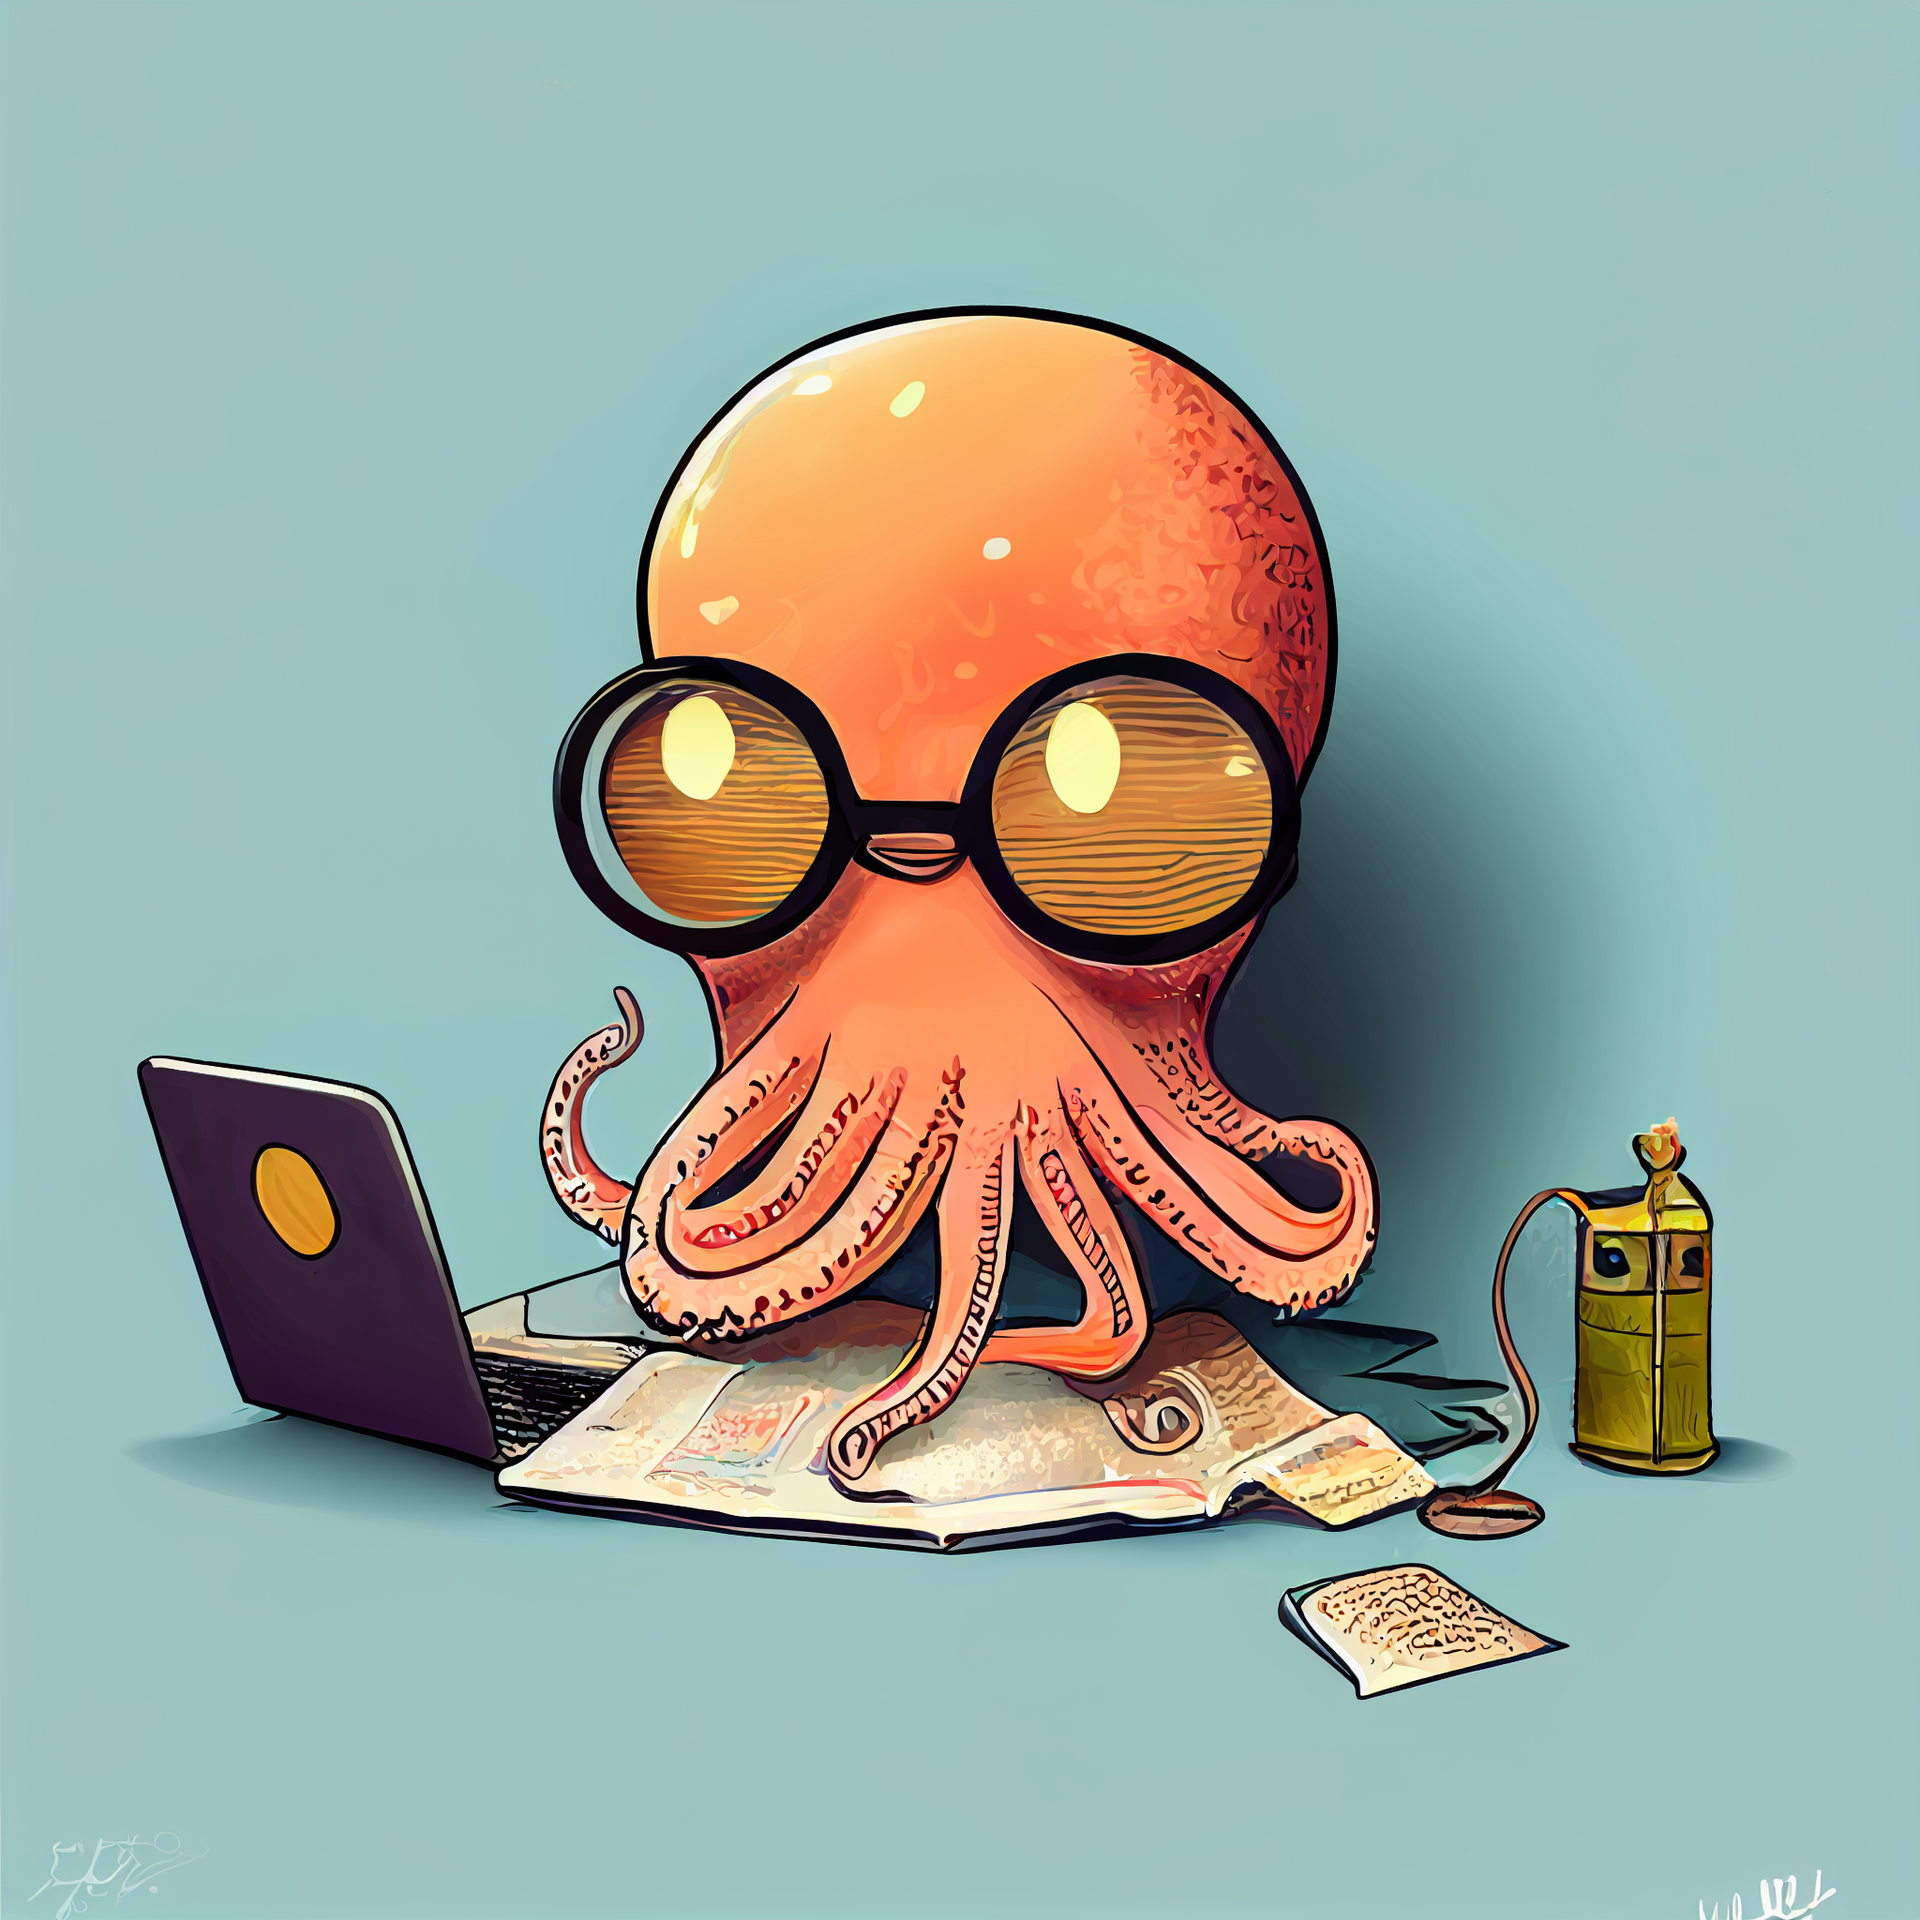 Rich Octopus visualizing different retirement strategies